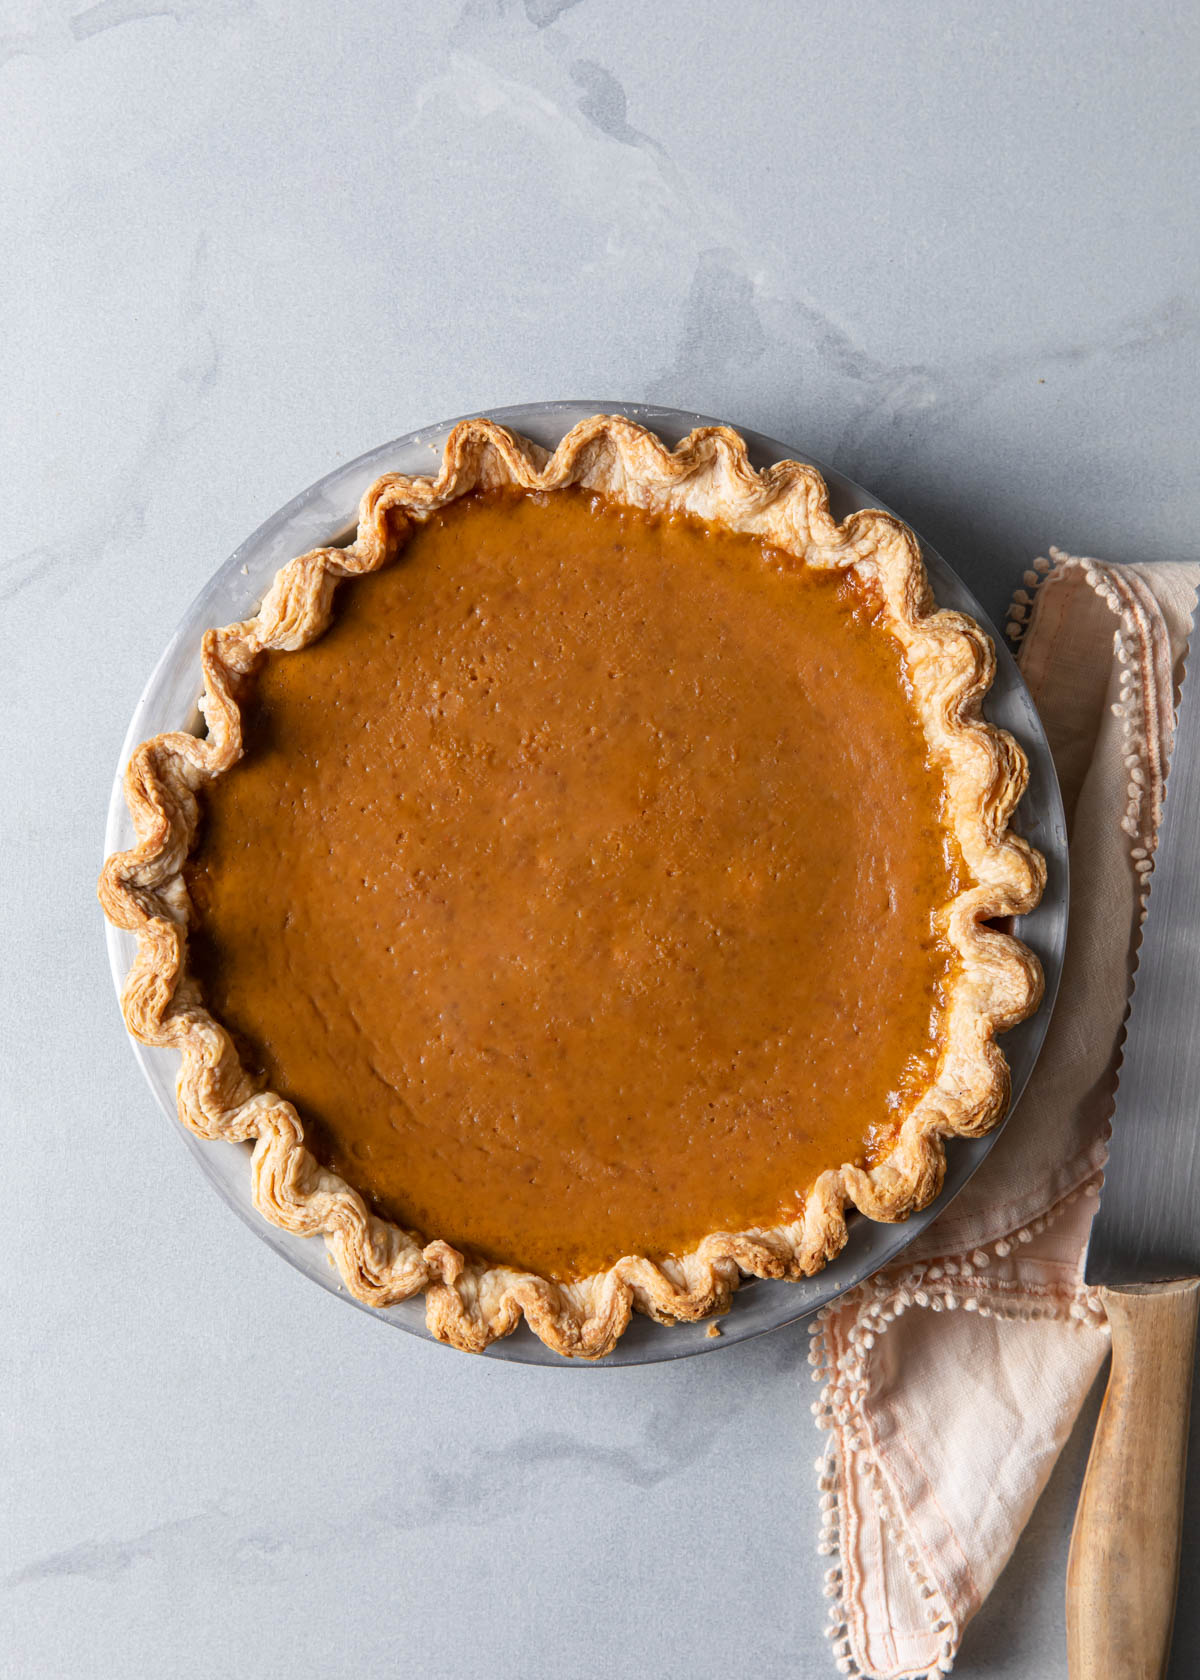 A baked pumpkin pie straight from the oven.